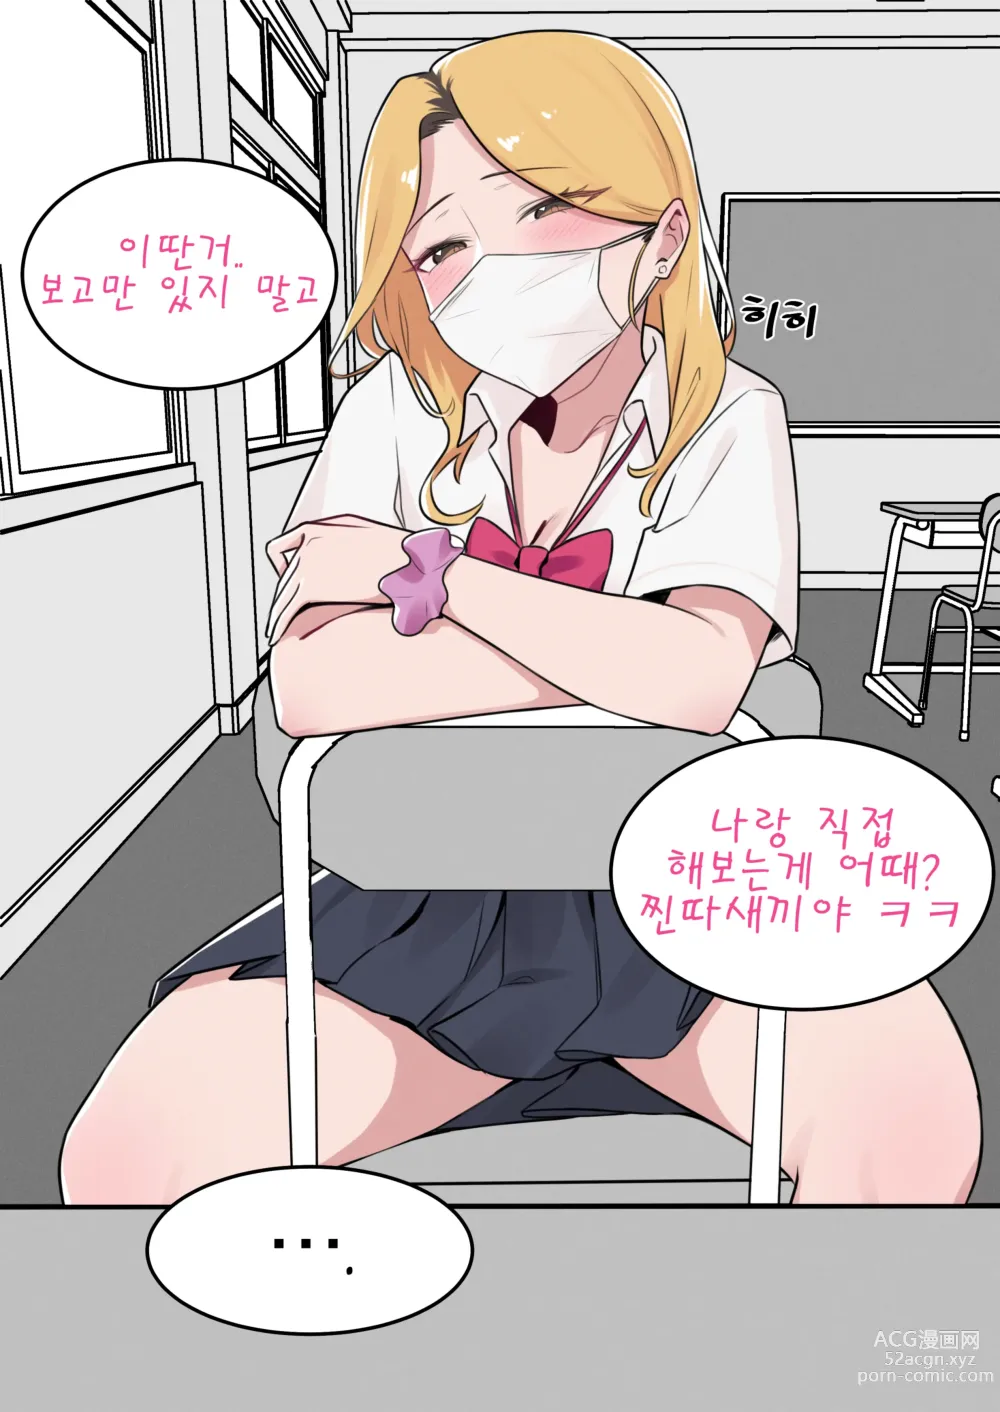 Page 3 of doujinshi After school with Il Jin-nyeo